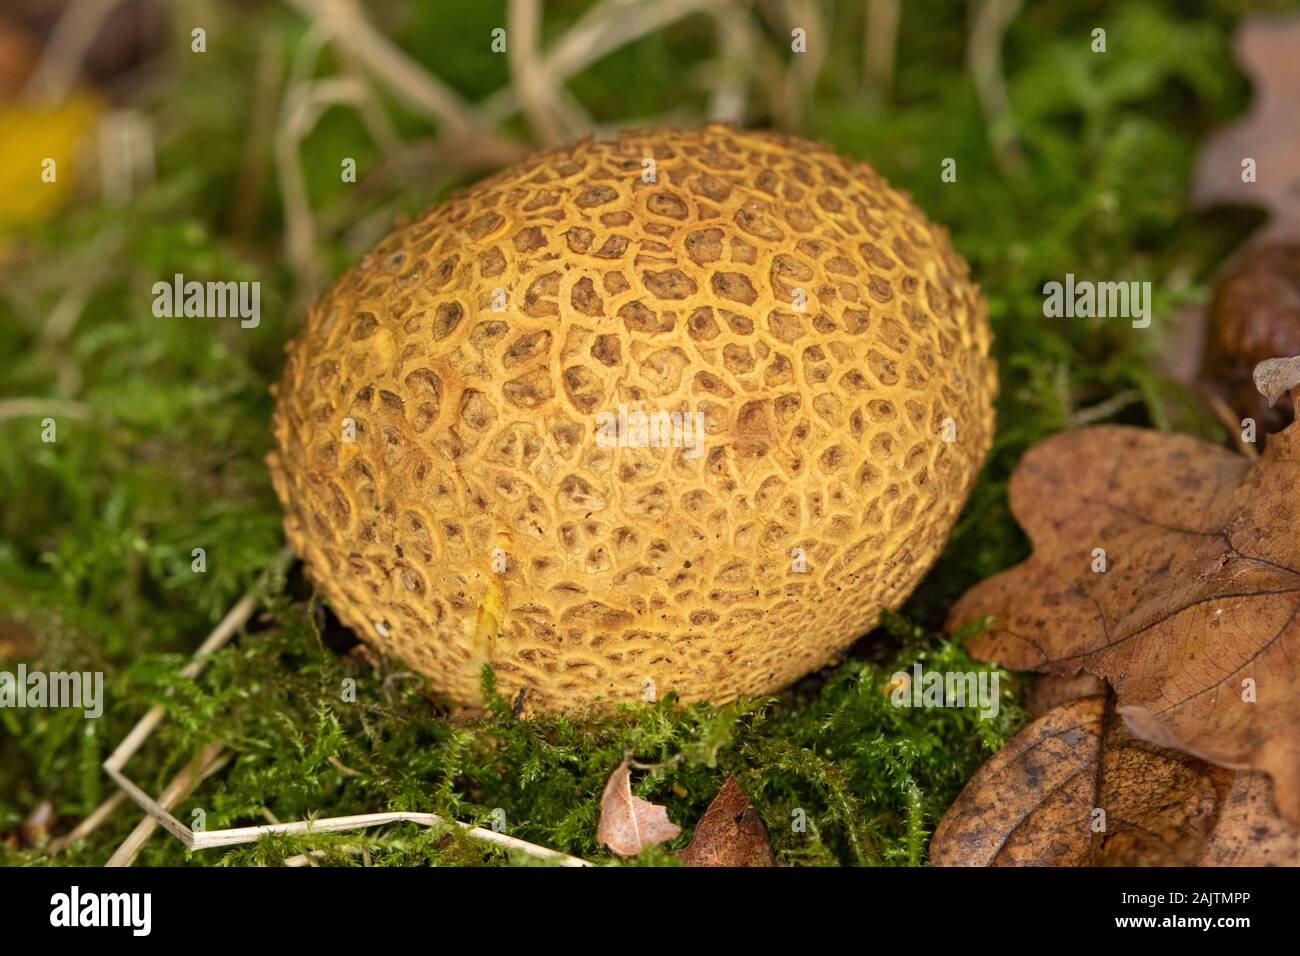 Earthball Commun (Scleroderma Citrinum) Banque D'Images